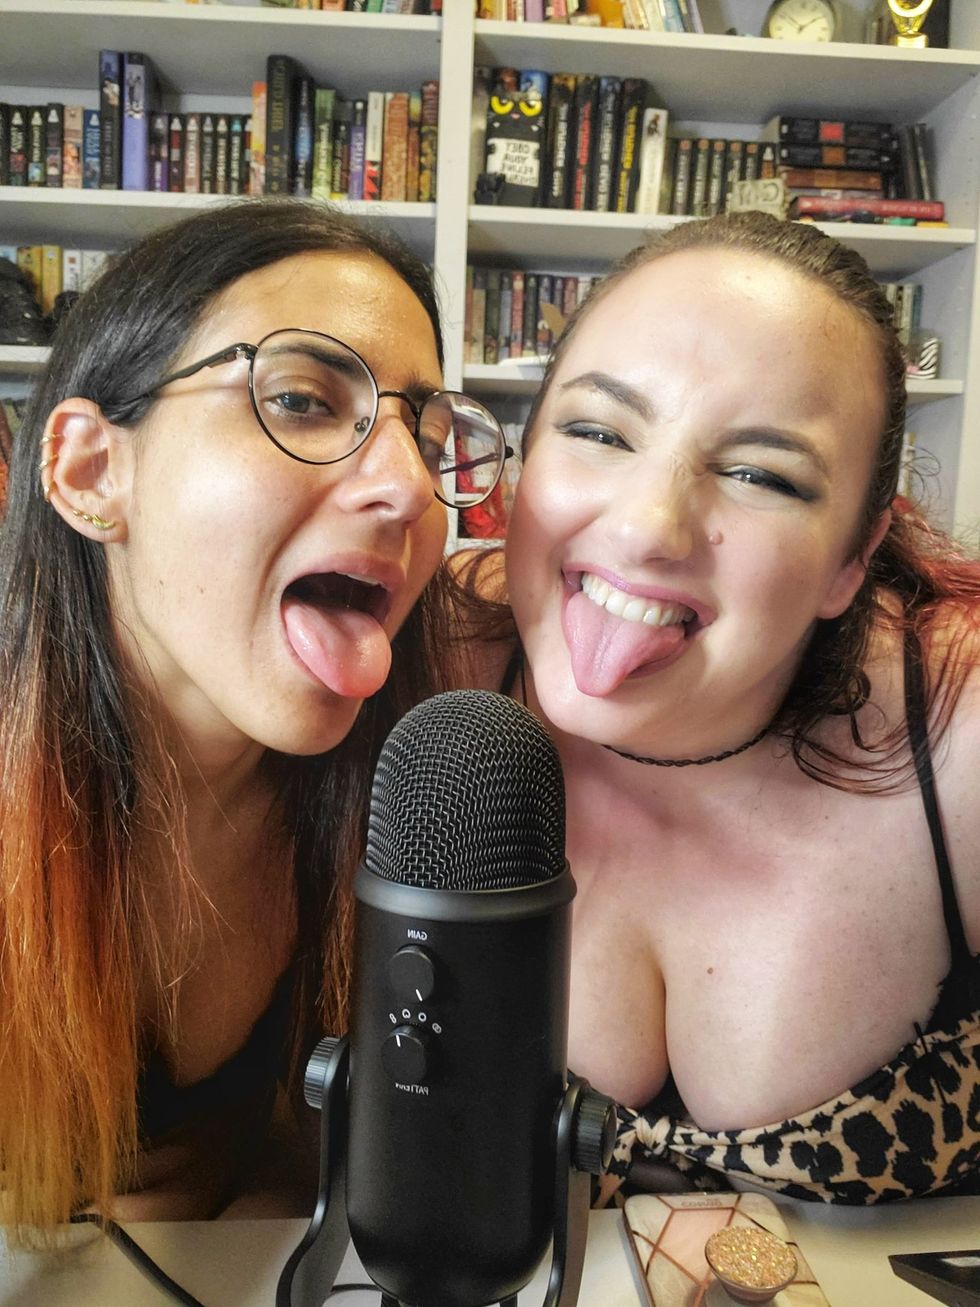 Two women sticking their tongues out while livestreaming